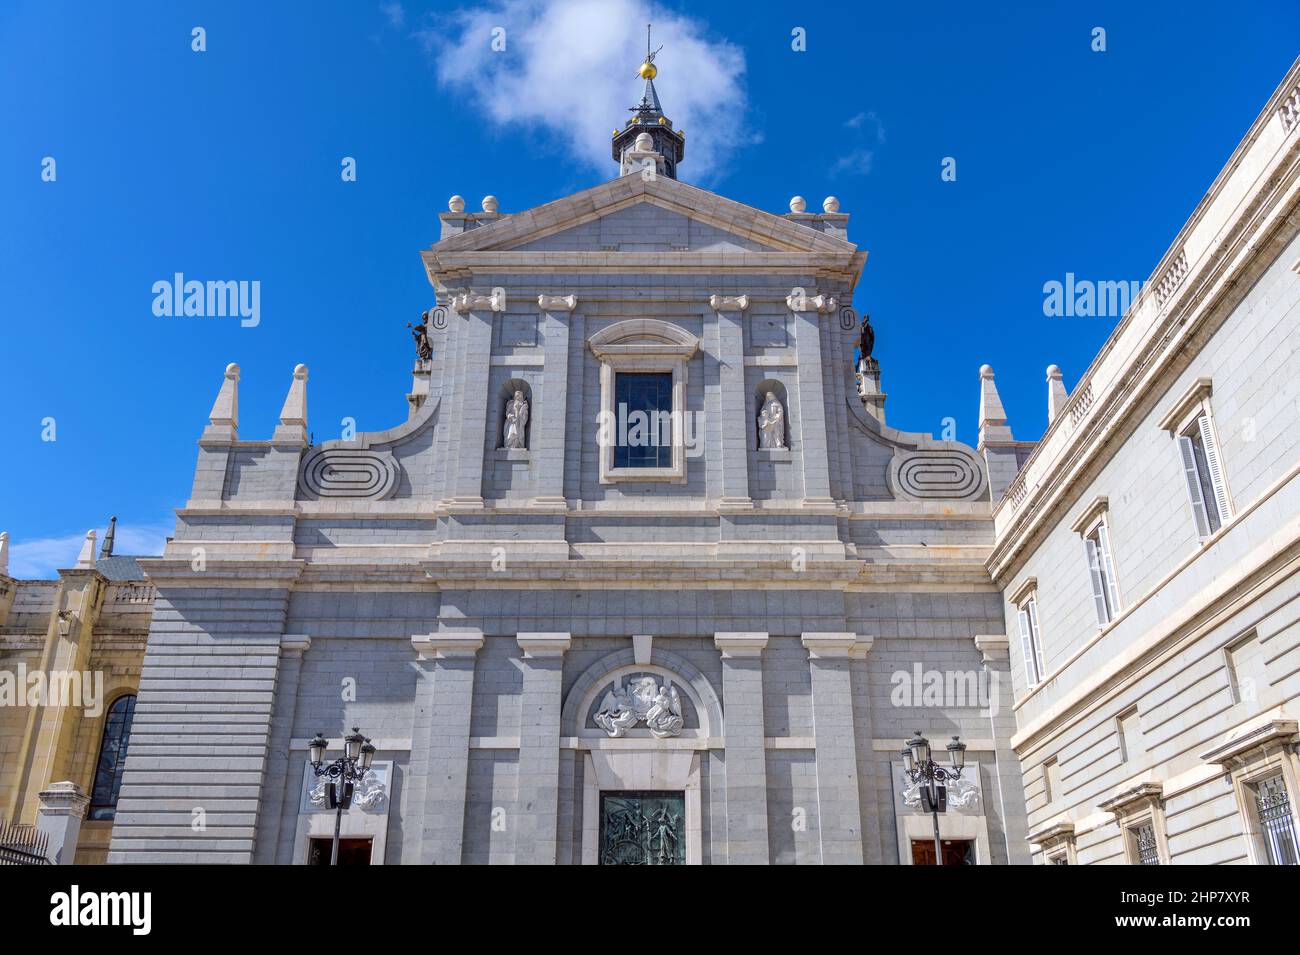 East Entrance of Almudena Cathedral - A sunny Autumn day view of the façade of east entrance of Almudena Cathedral, Madrid, Spain. Stock Photo